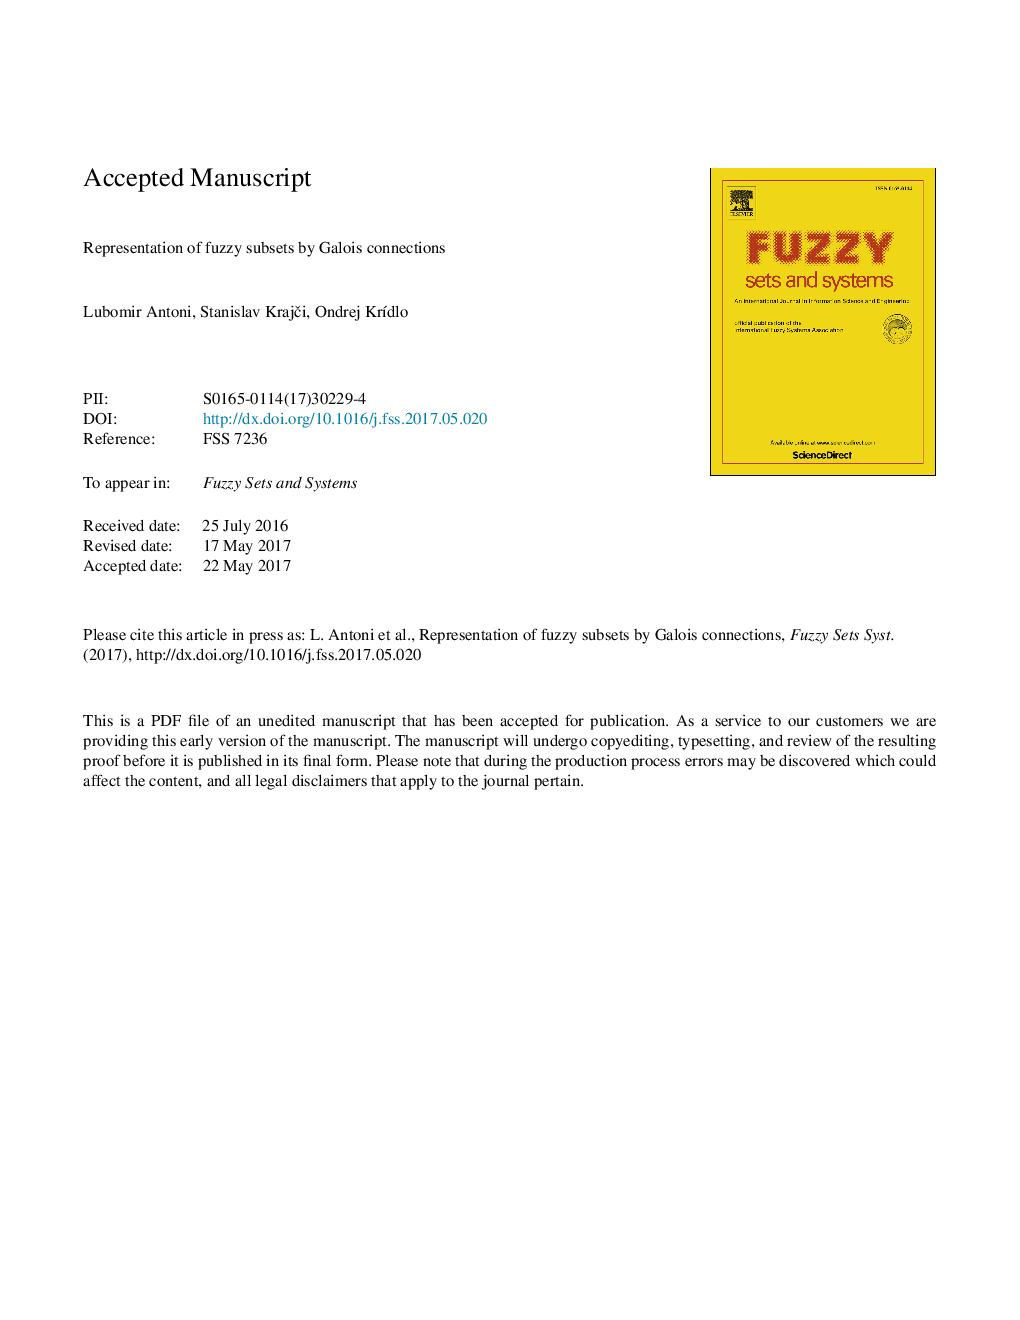 Representation of fuzzy subsets by Galois connections